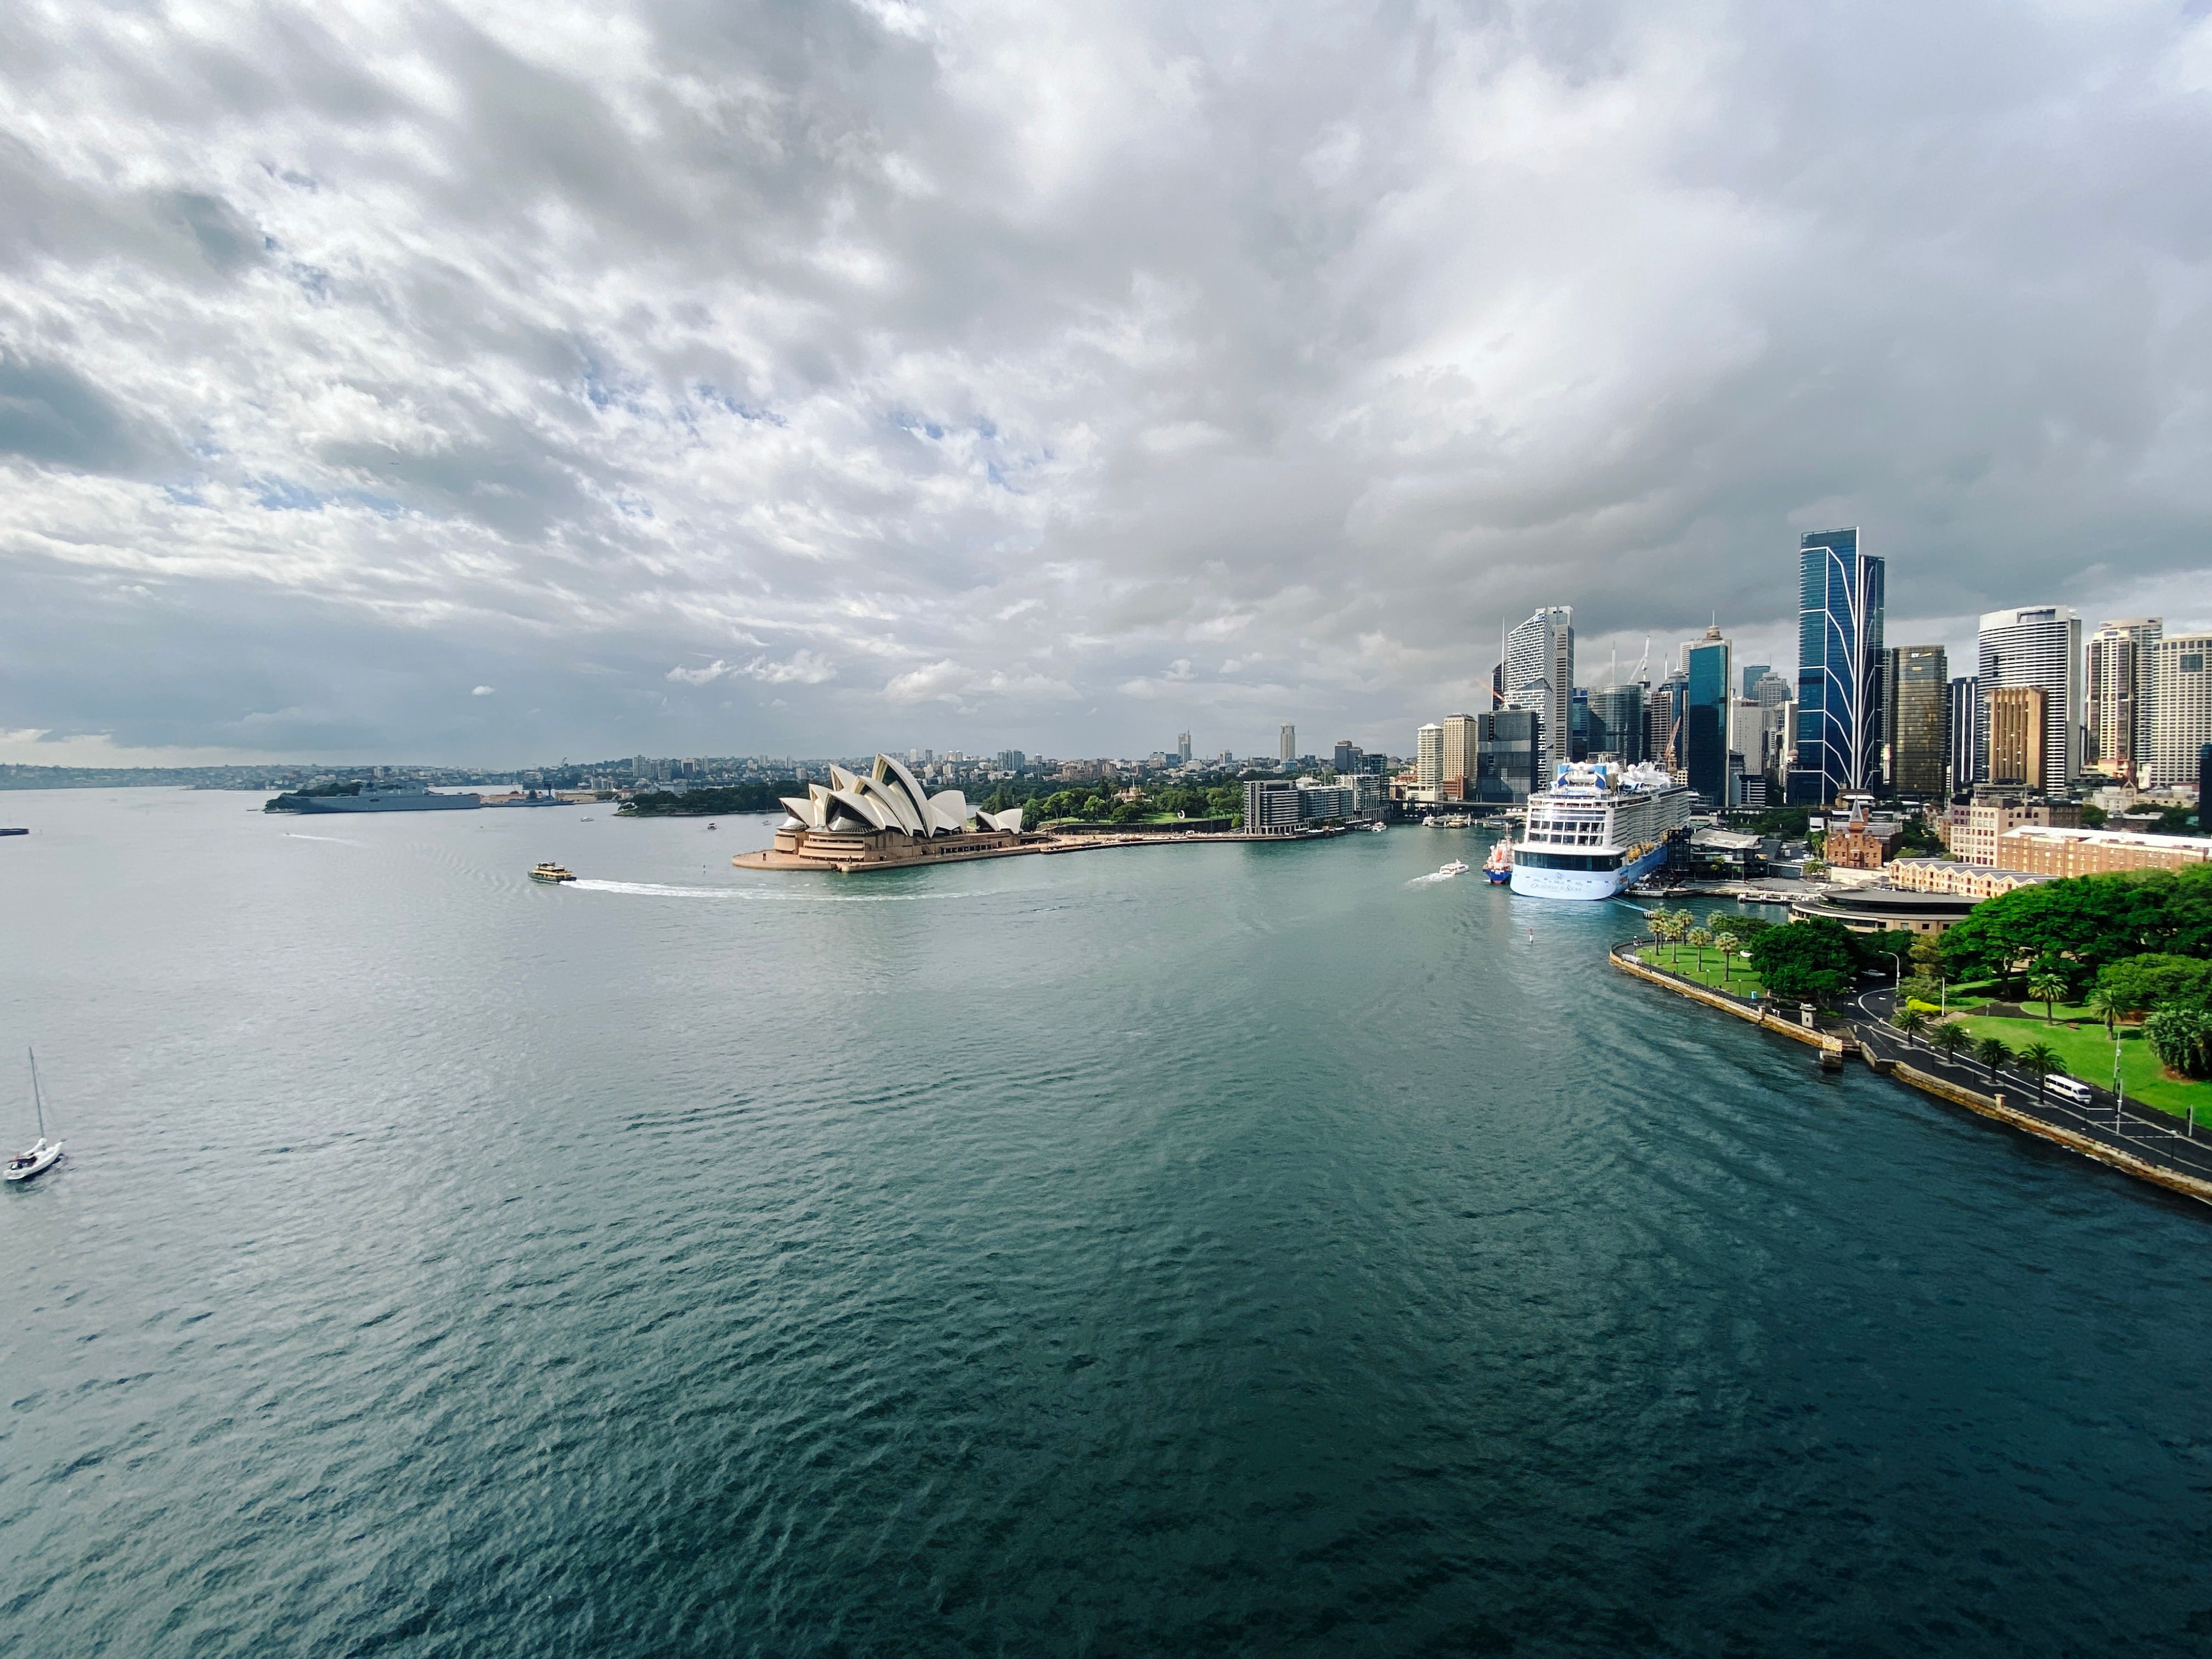 A wide-angle view taken from the middle of the Sydney Harbour Bridge looking over at the Sydney Opera House. There's a GIANT cruise ship moored at Circular Quay to the right, behind which are a bunch of tall buildings. The sky is all grey and cloudy with very small patches of blue poking through.